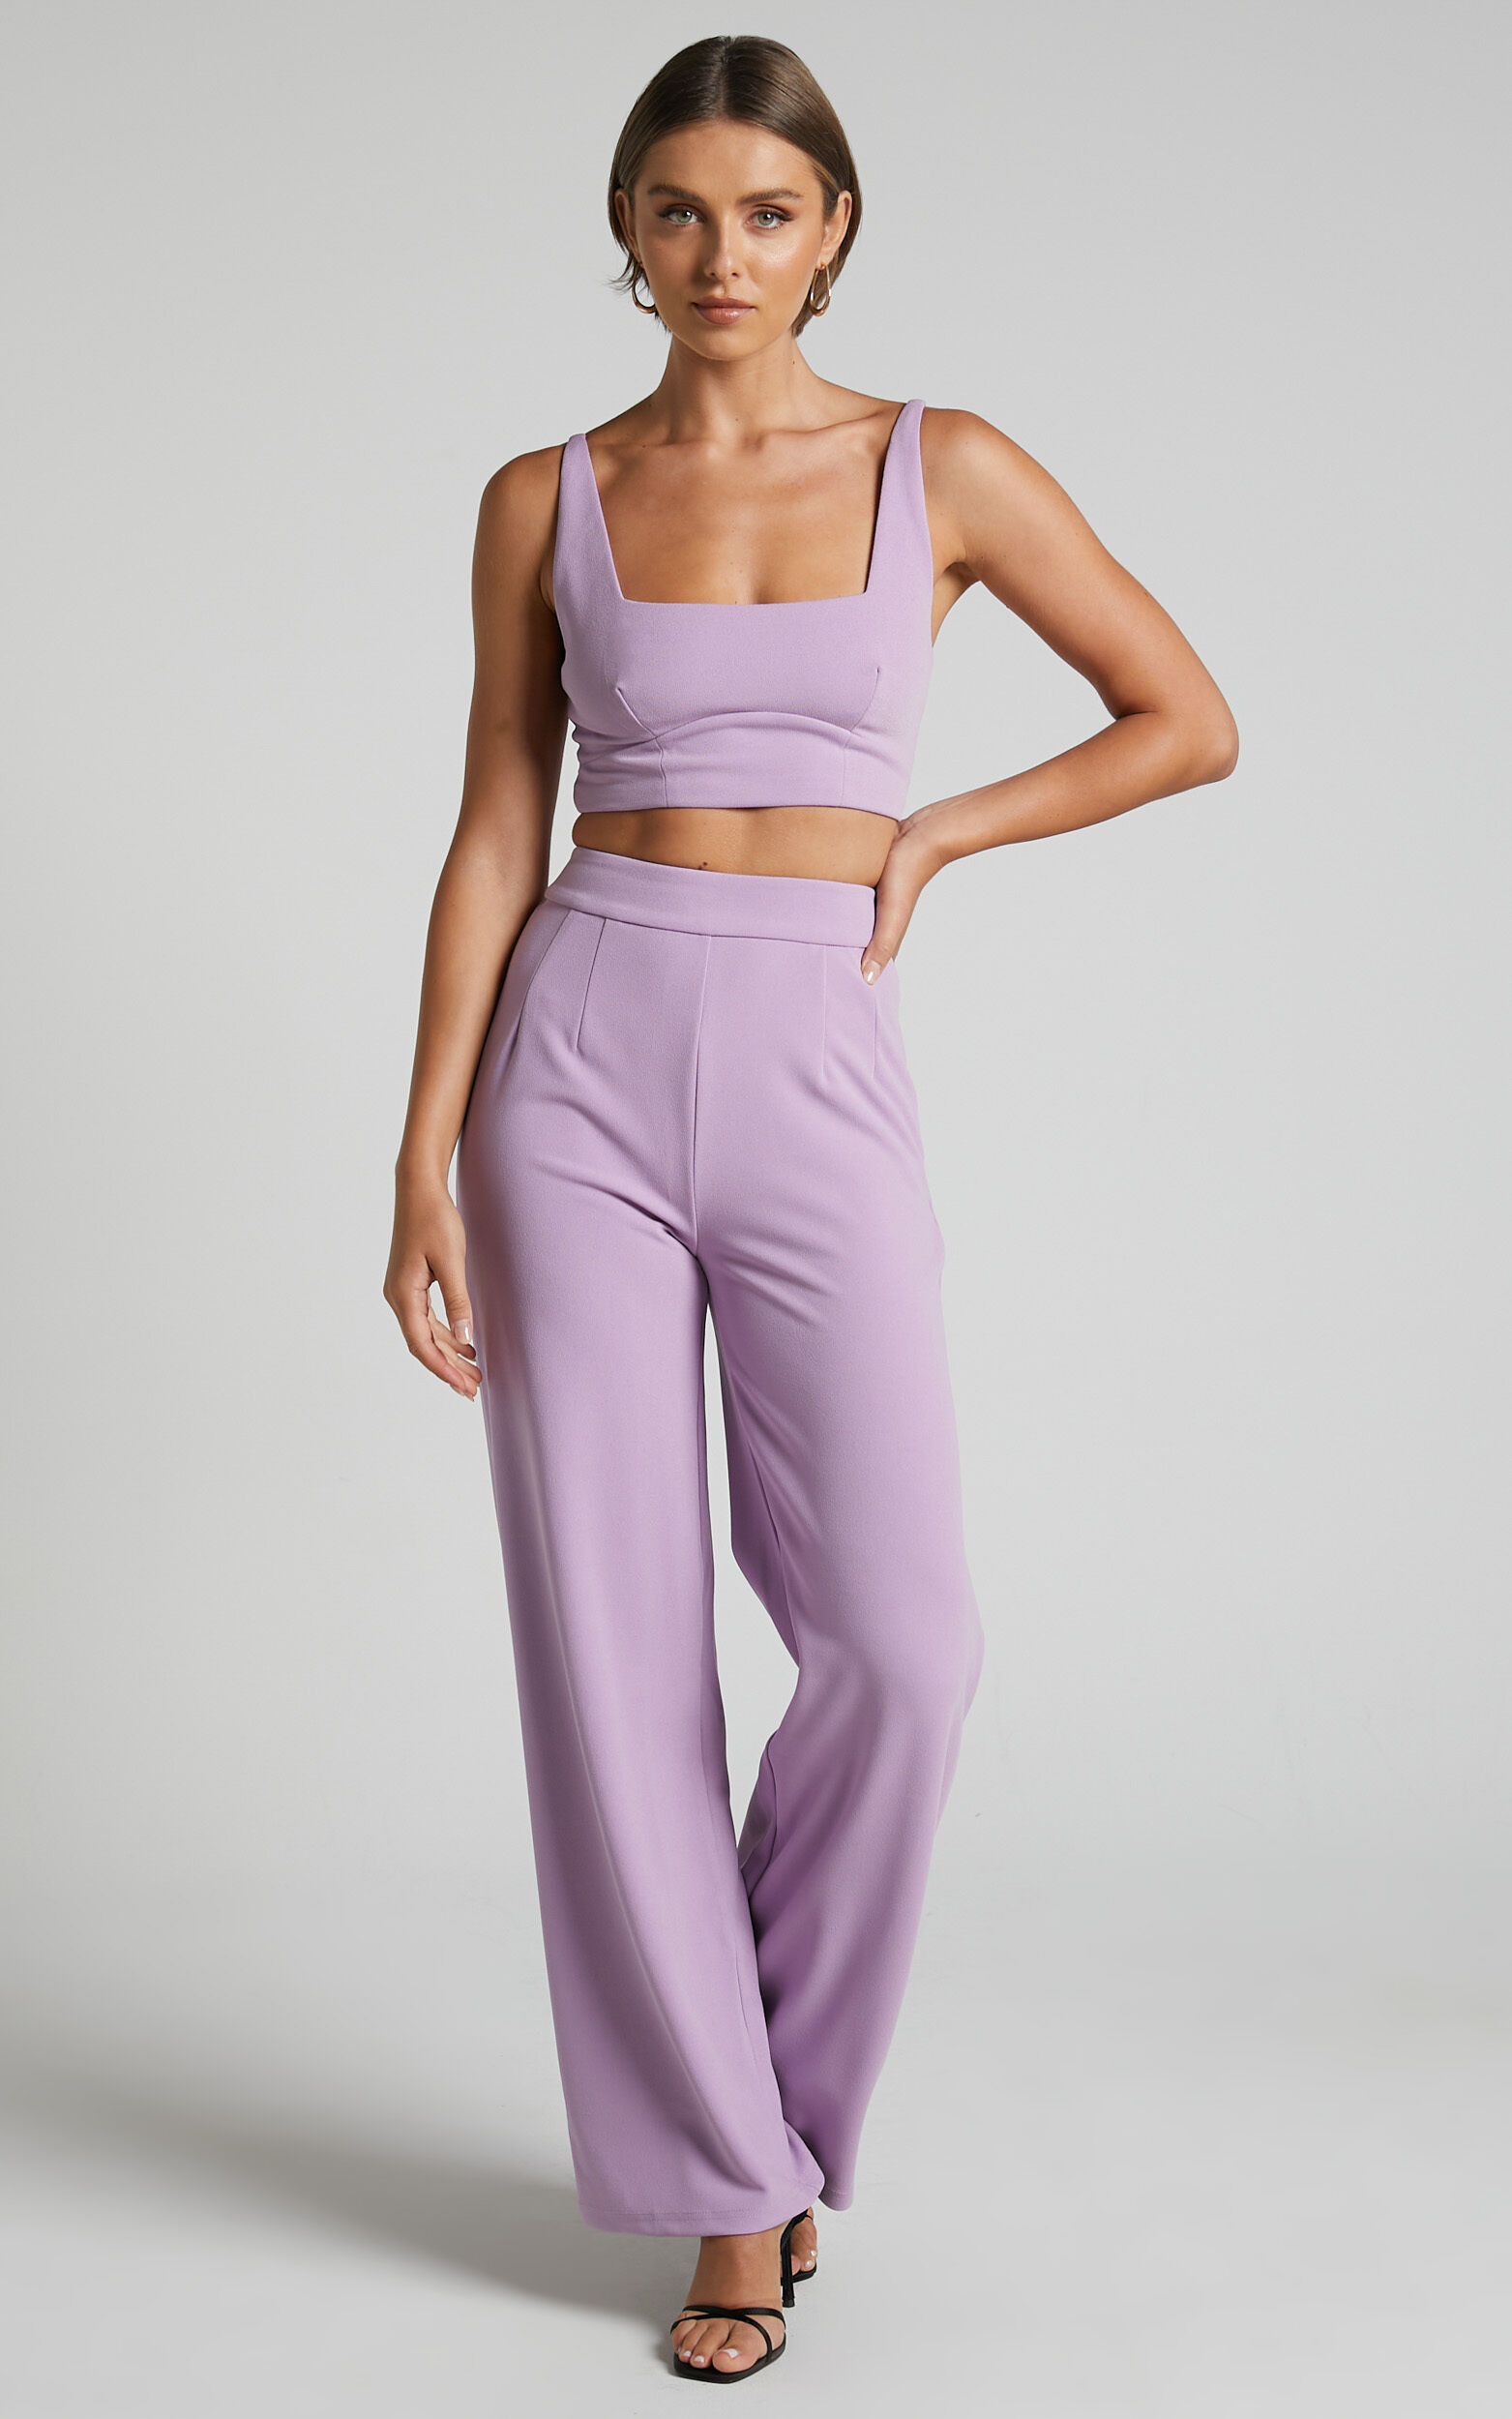 Elibeth Two Piece Set - Crop Top and High Waisted Wide Leg Pants Set in Lilac - 04, PRP5